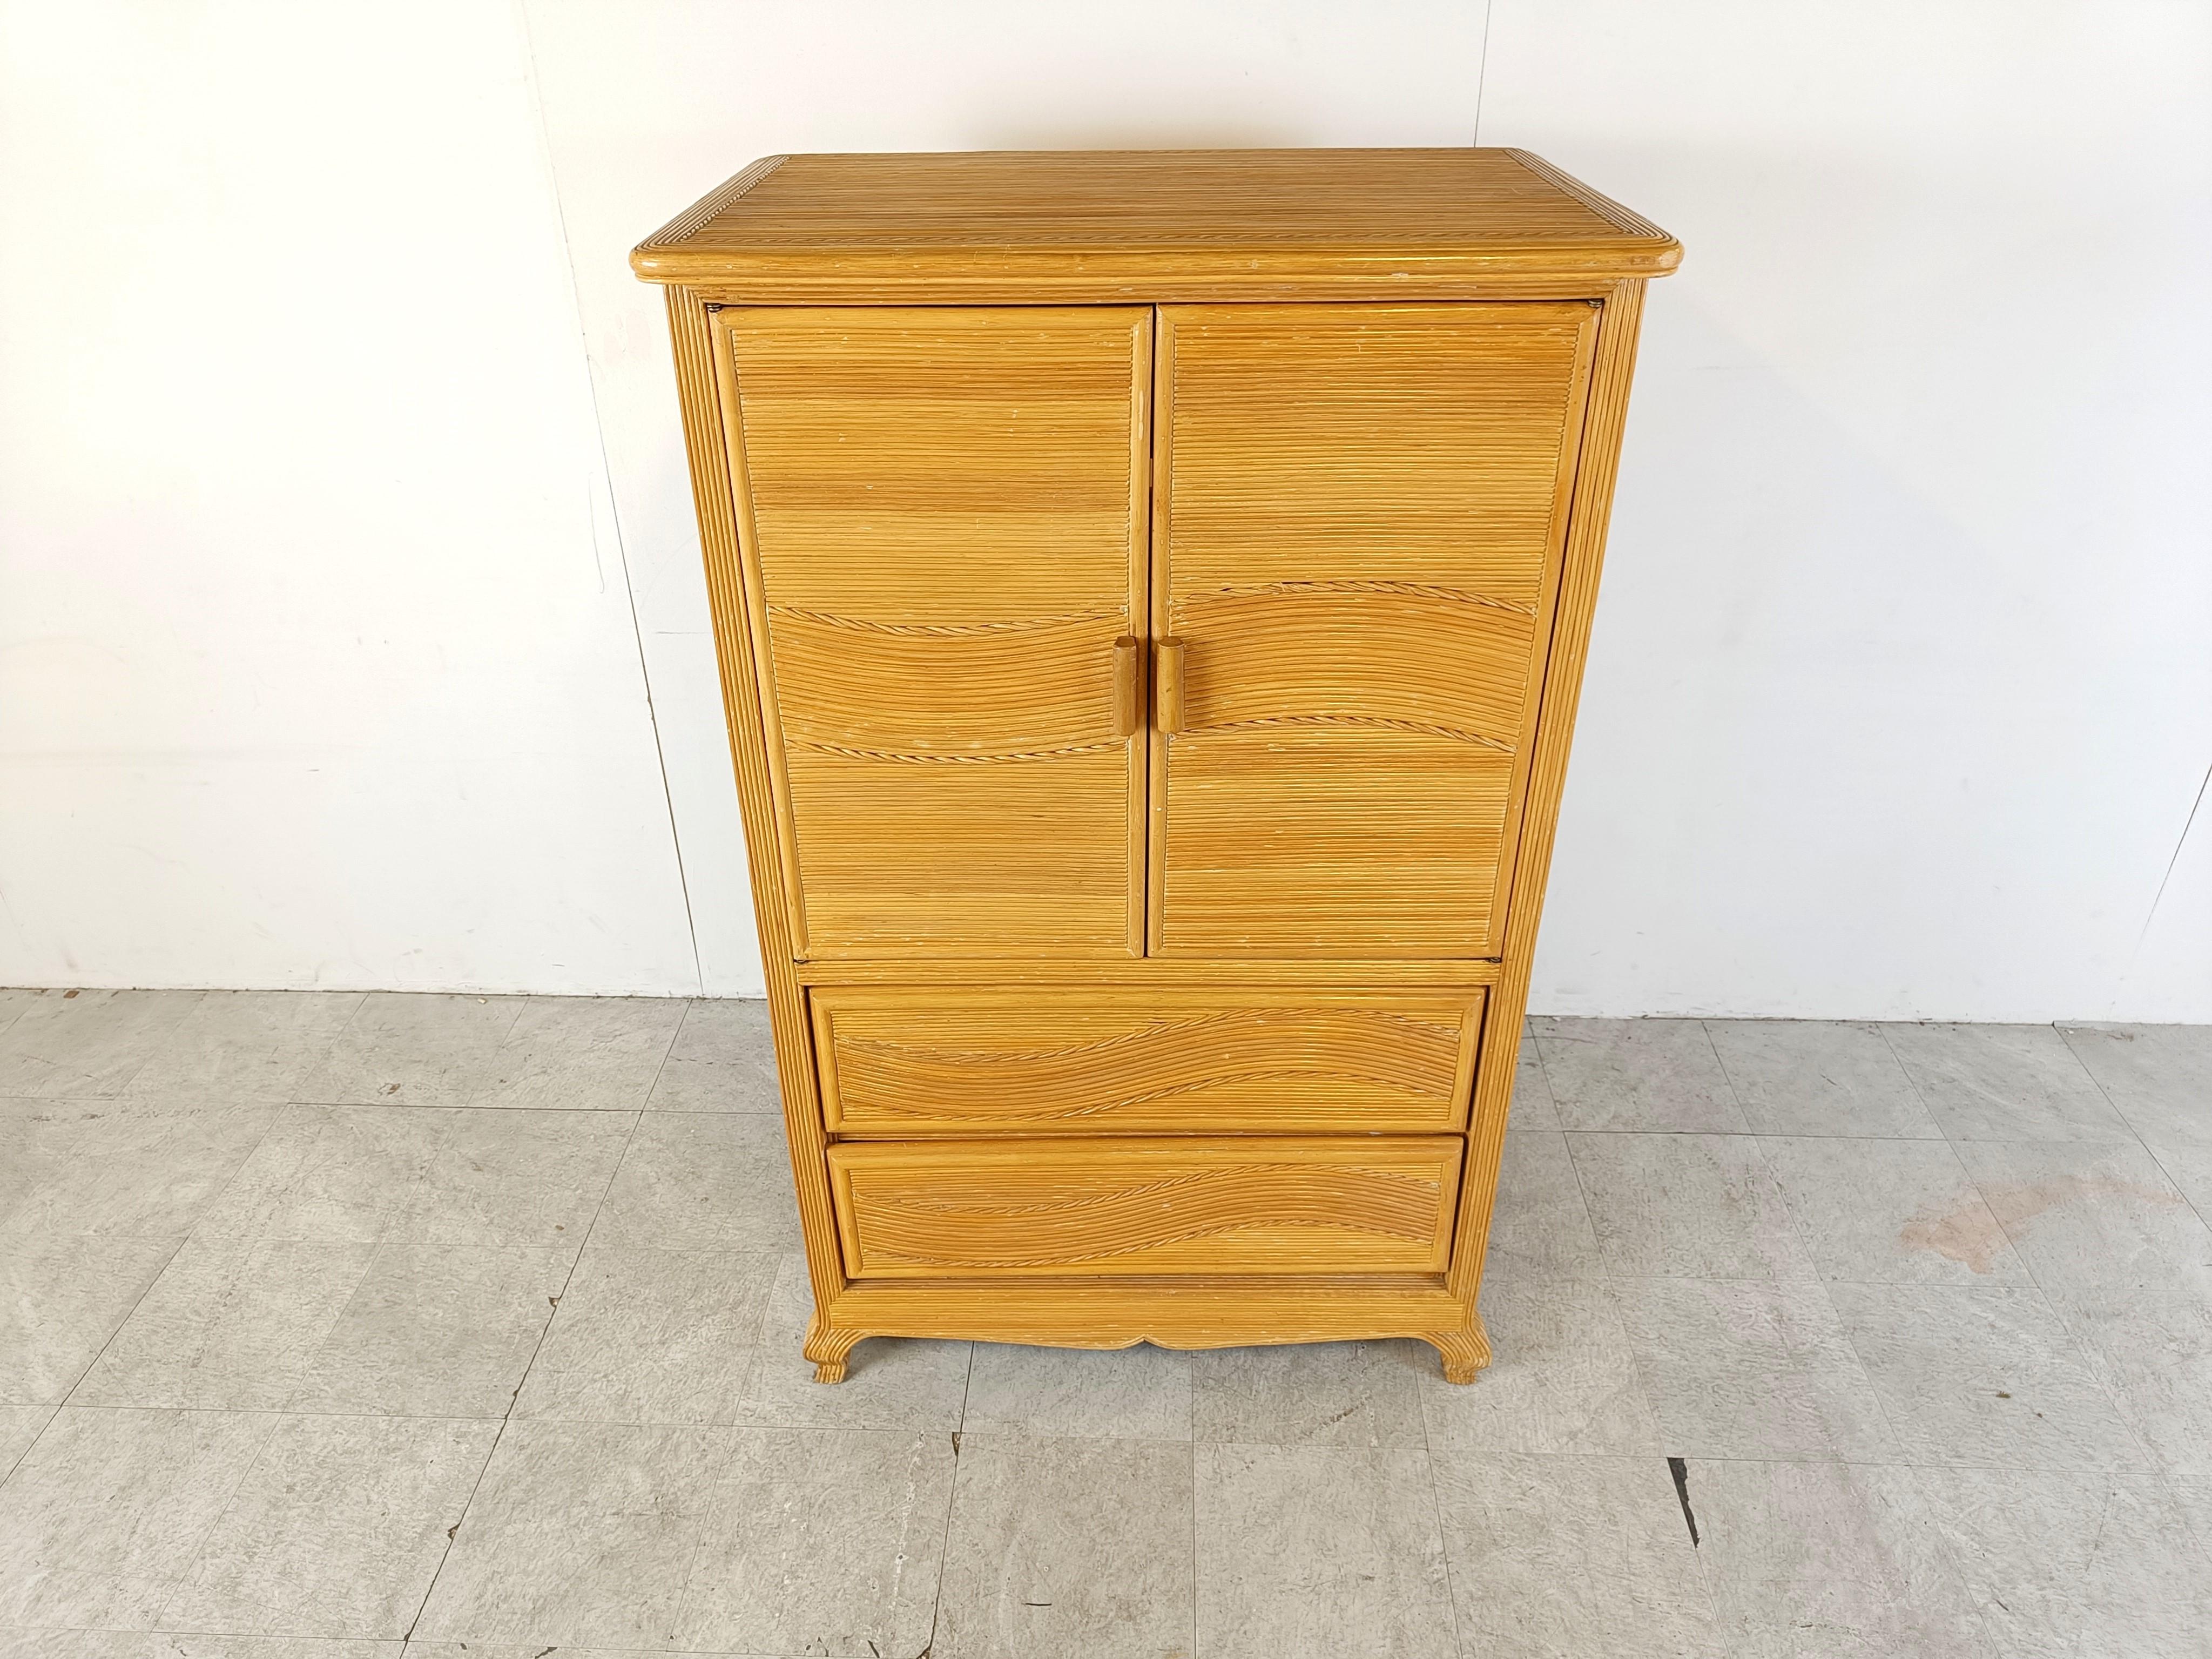 Elegant pencil reed cabinet with two doors and two drawers.

Very elegant curved legs and a nice reeded pattern running troughout.

Good condition.

1970s - France

Dimensions:
Lenght: 90cm/35.43